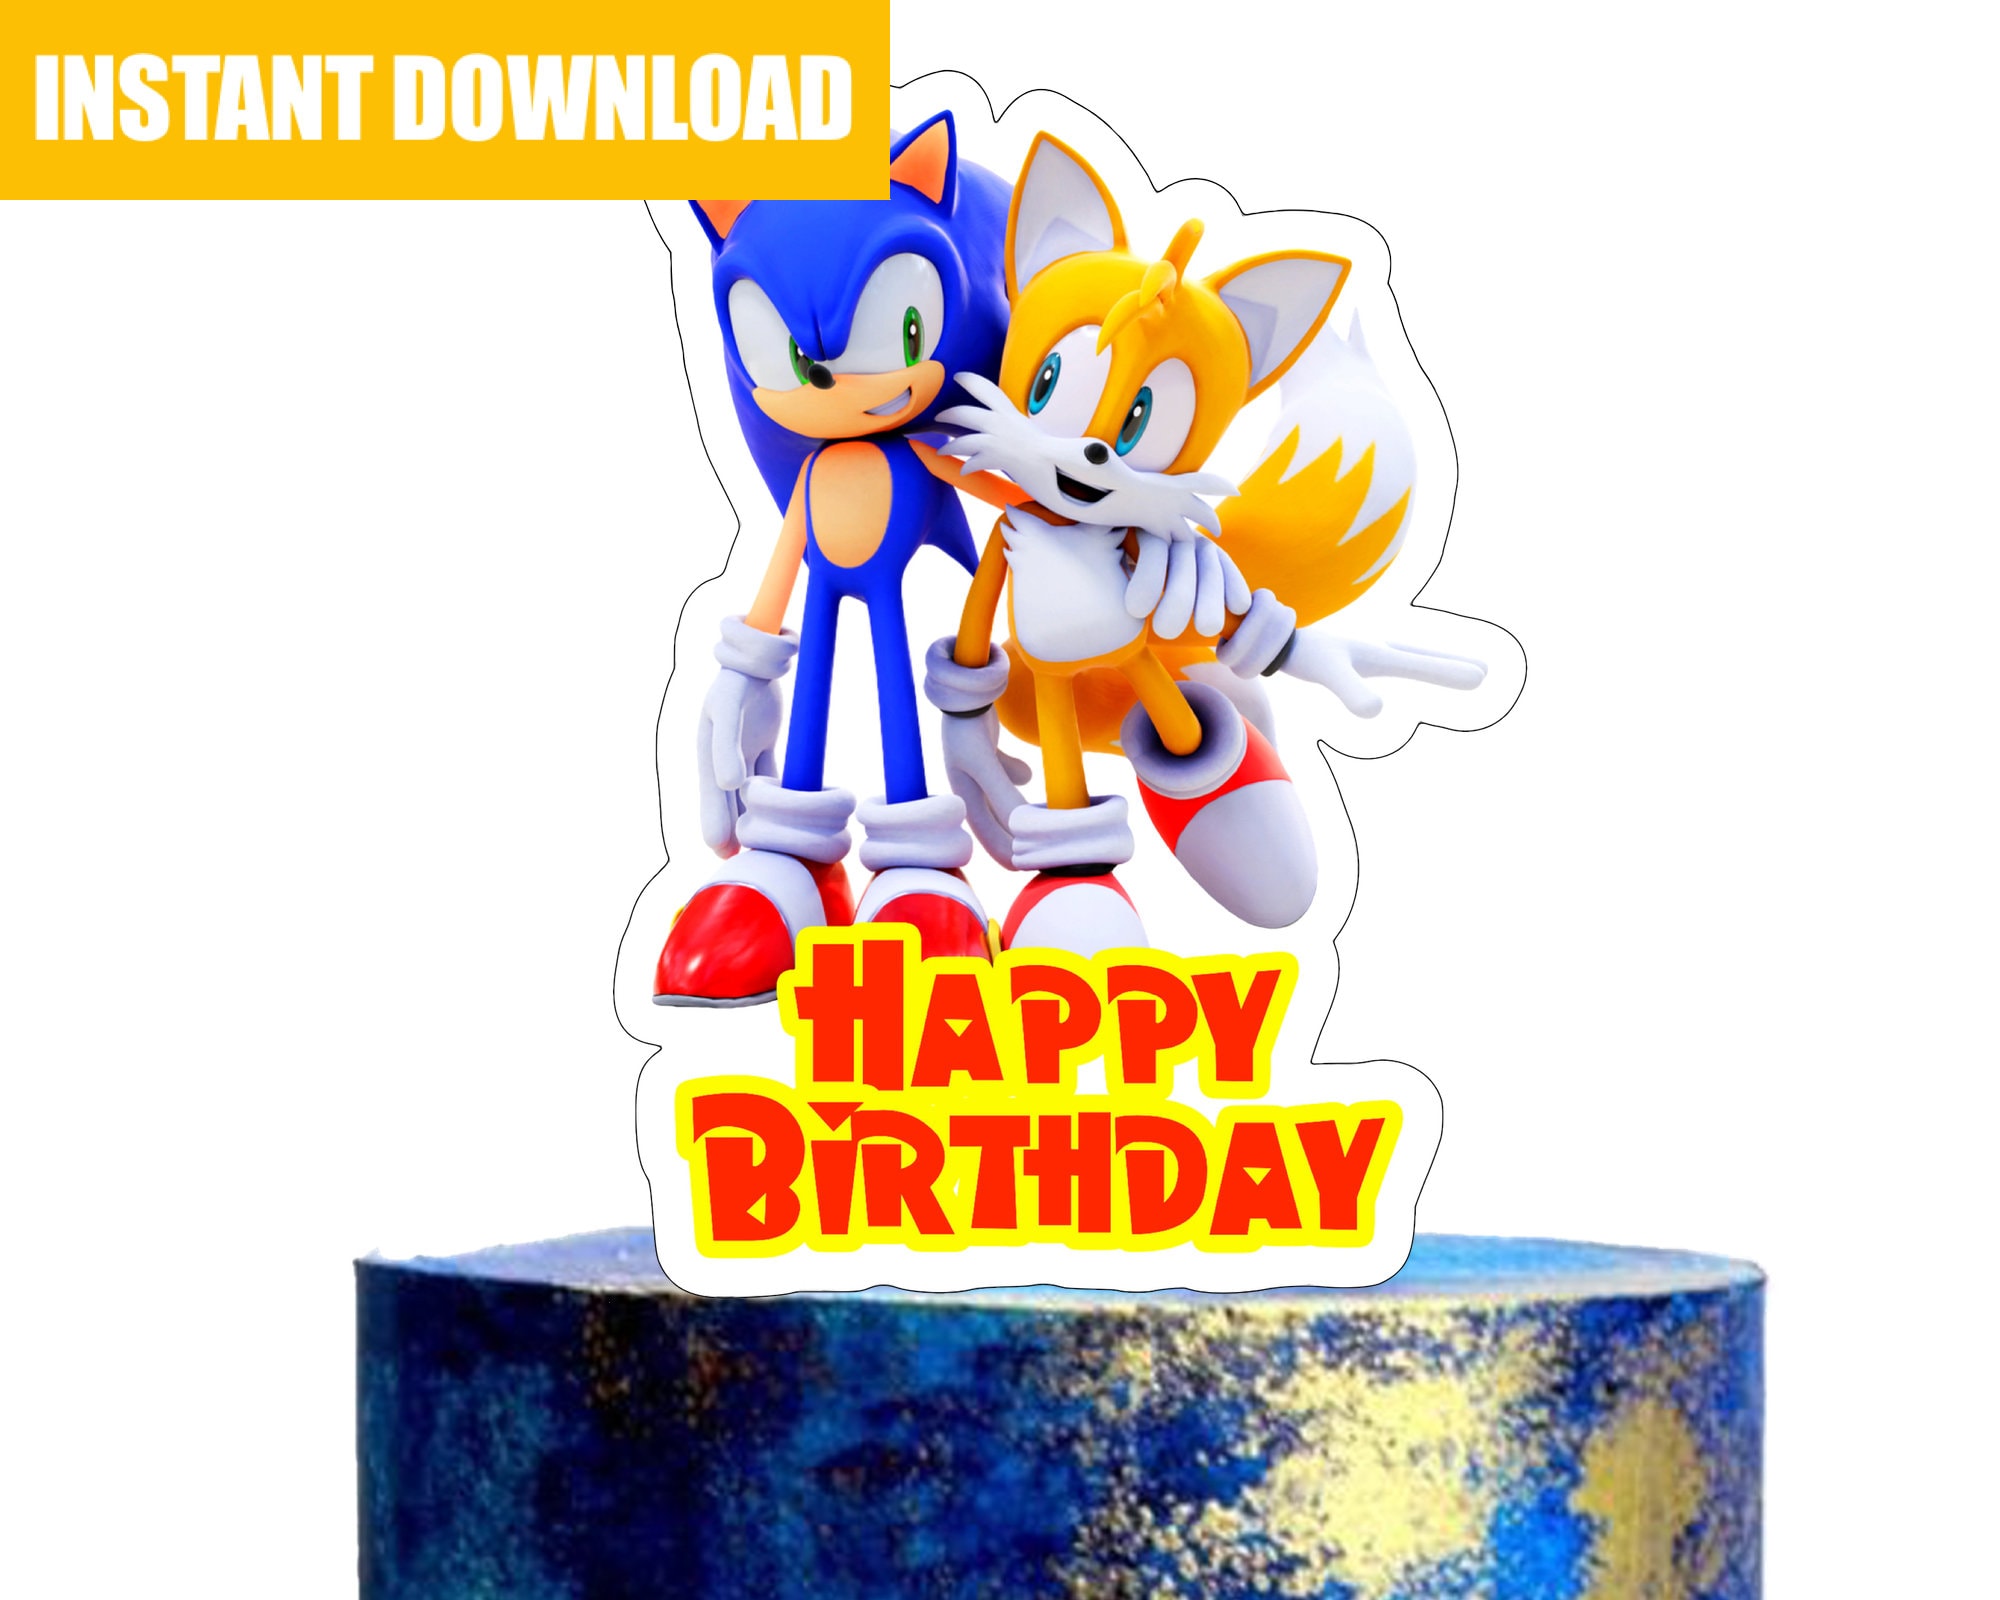 Sonic The Hedgehog and Tails Edible Cake Topper Image ABPID01258 